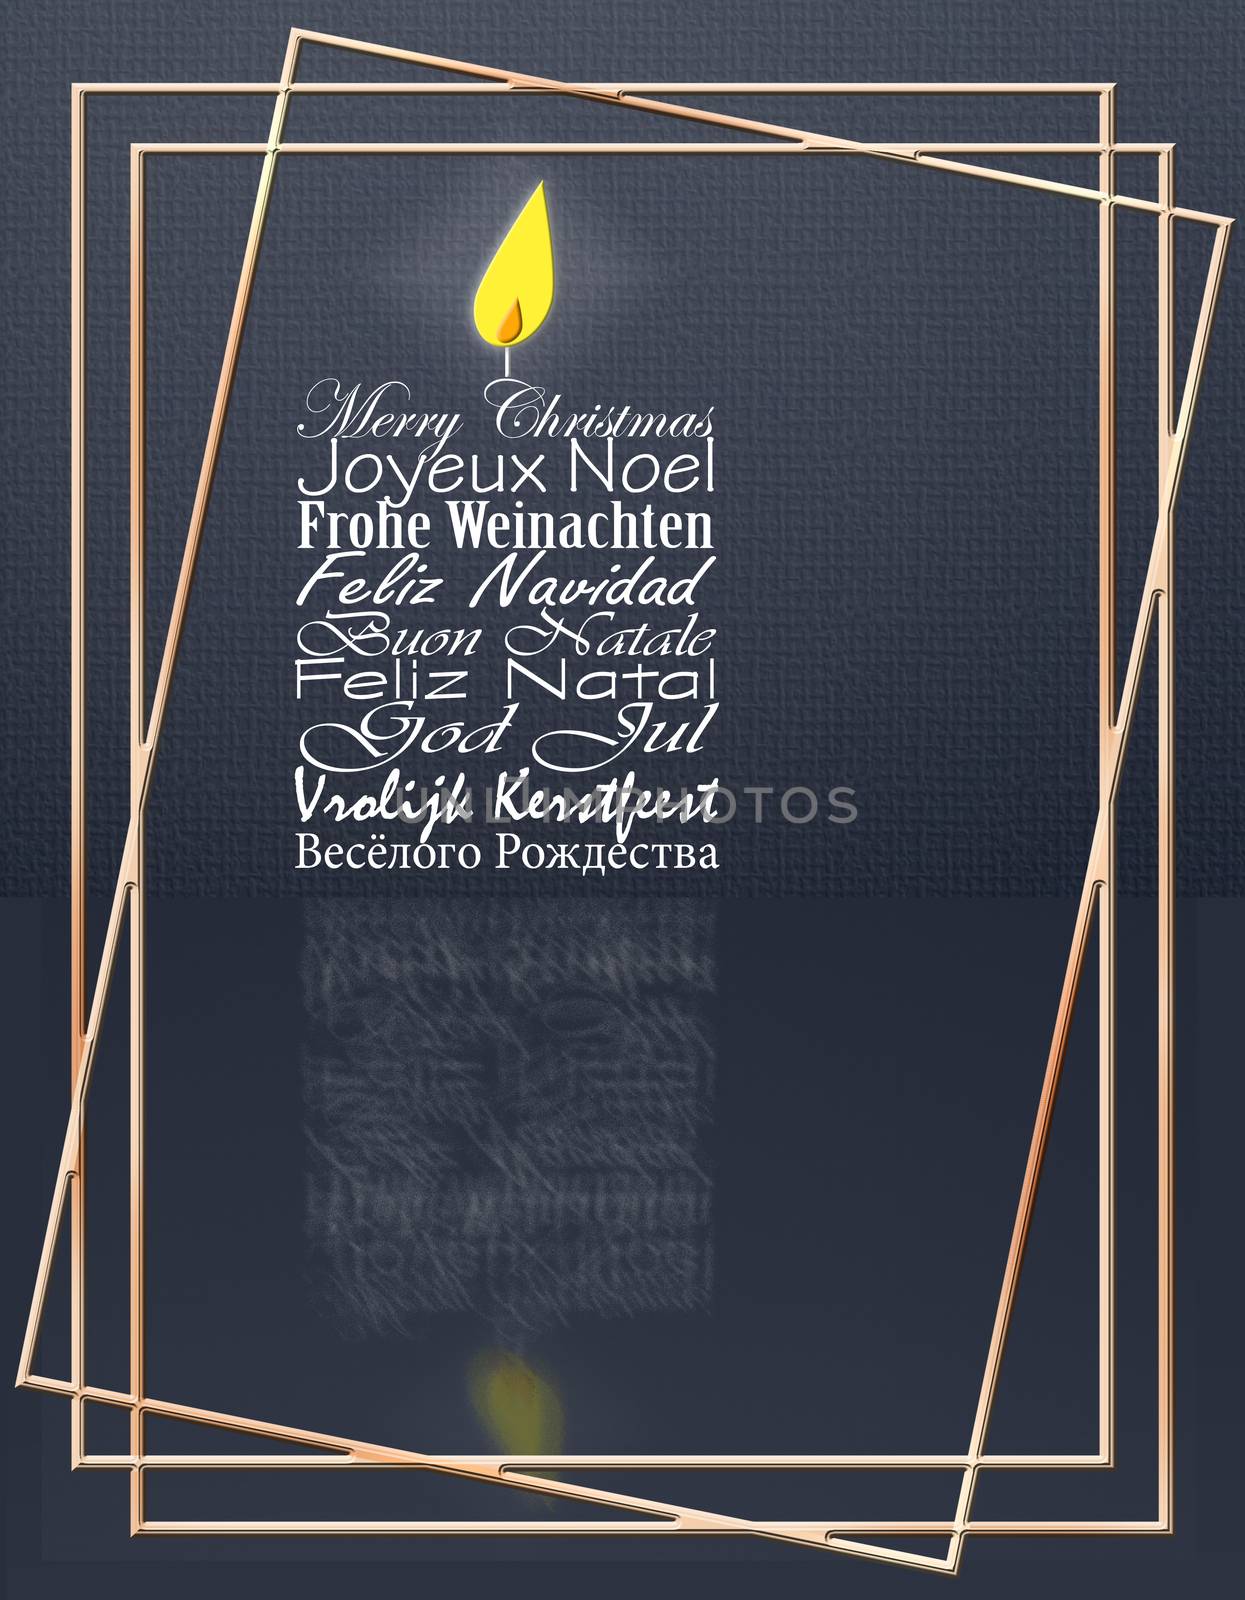 Luxury Merry Christmas wishes in multiple languages English, French, German, Portuguese, Italian, Spanish, Swedish, Dutch, Russian shape of candle on black background with gold frames. 3D illustration